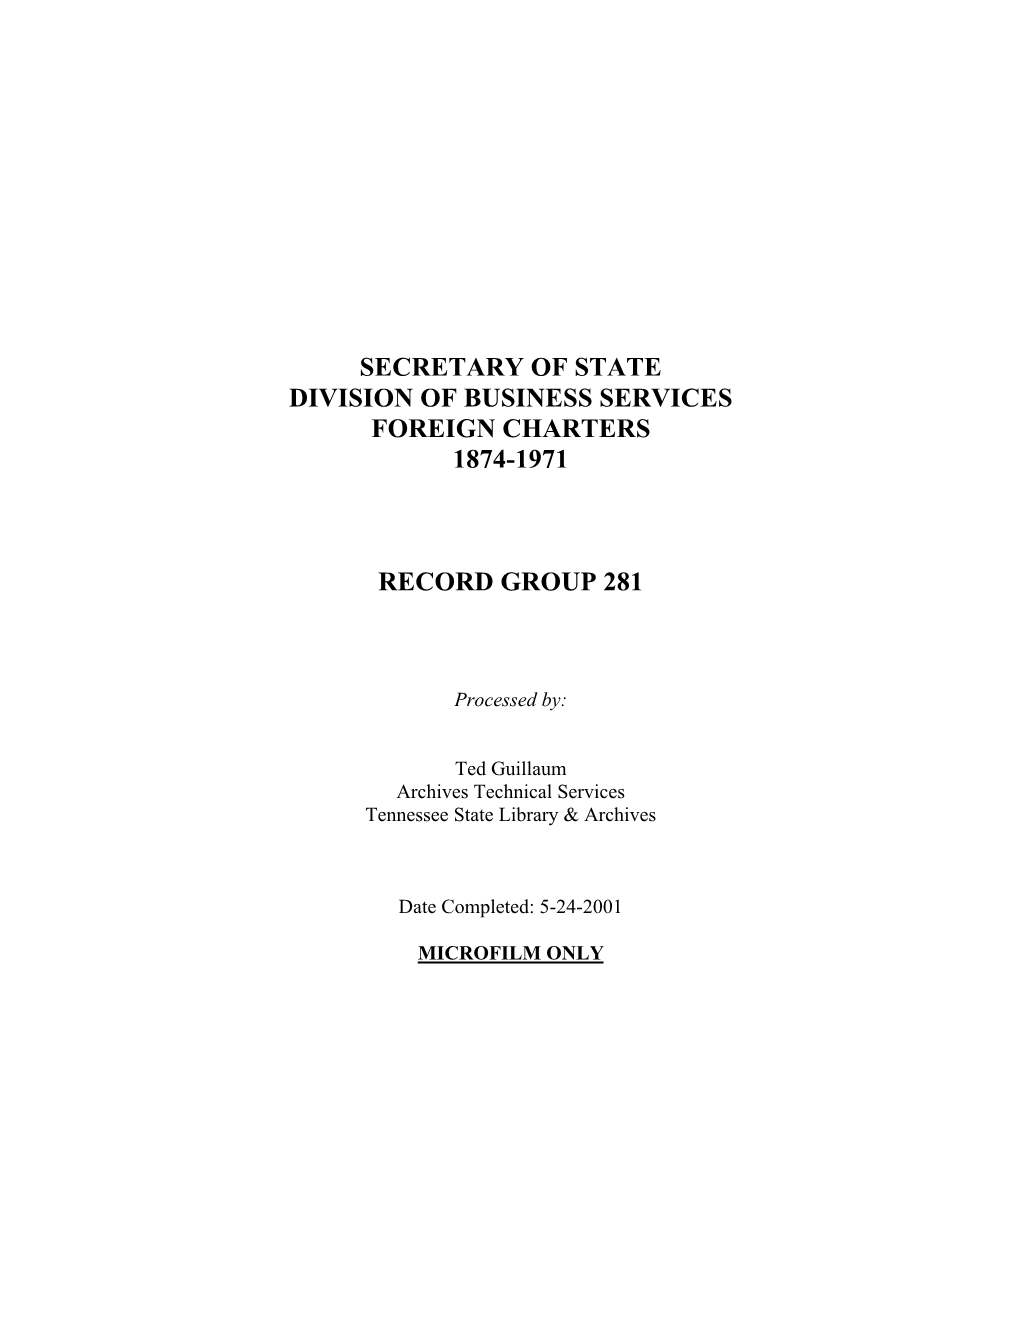 Secretary of State Division of Business Services Foreign Charters 1874-1971